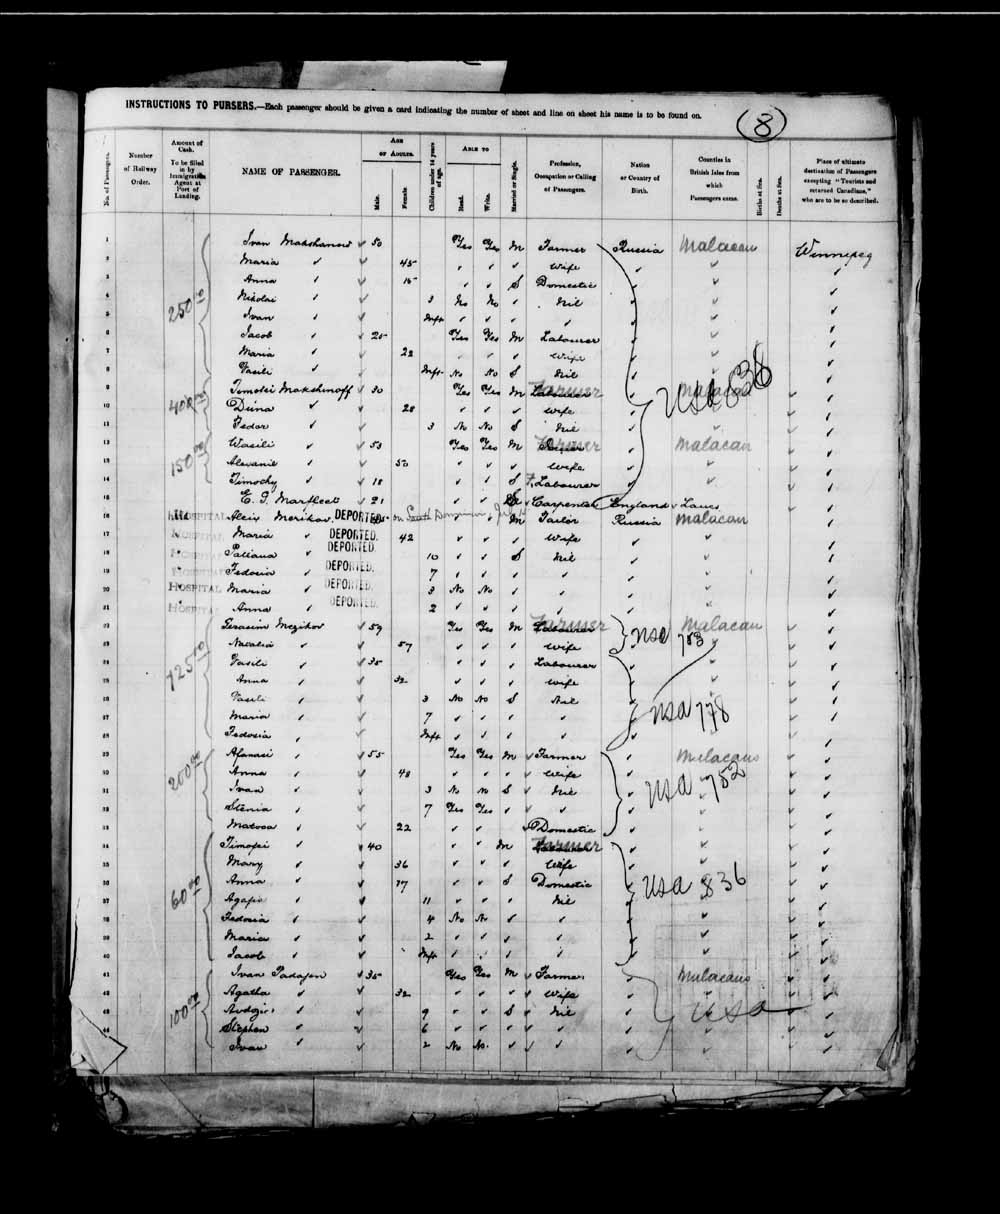 Digitized page of Passenger Lists for Image No.: e003658078